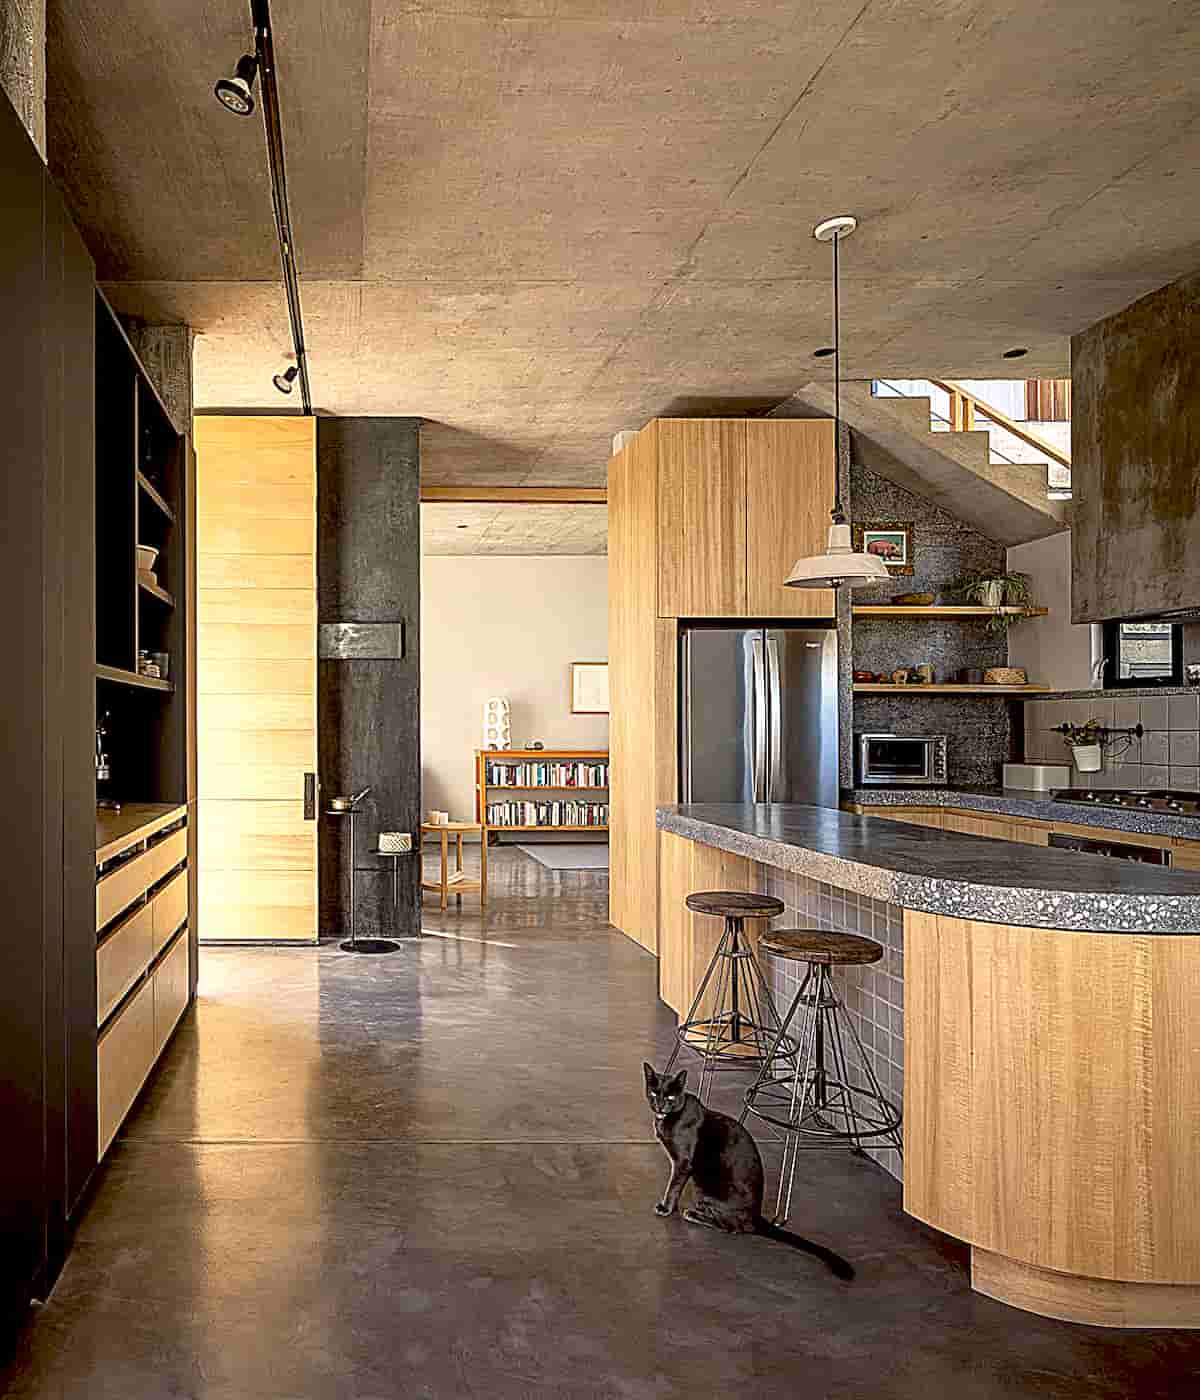 Architect Mauricio Alonso Uses Ceramics and Wood to Add Texture to a Concrete House in Mexic